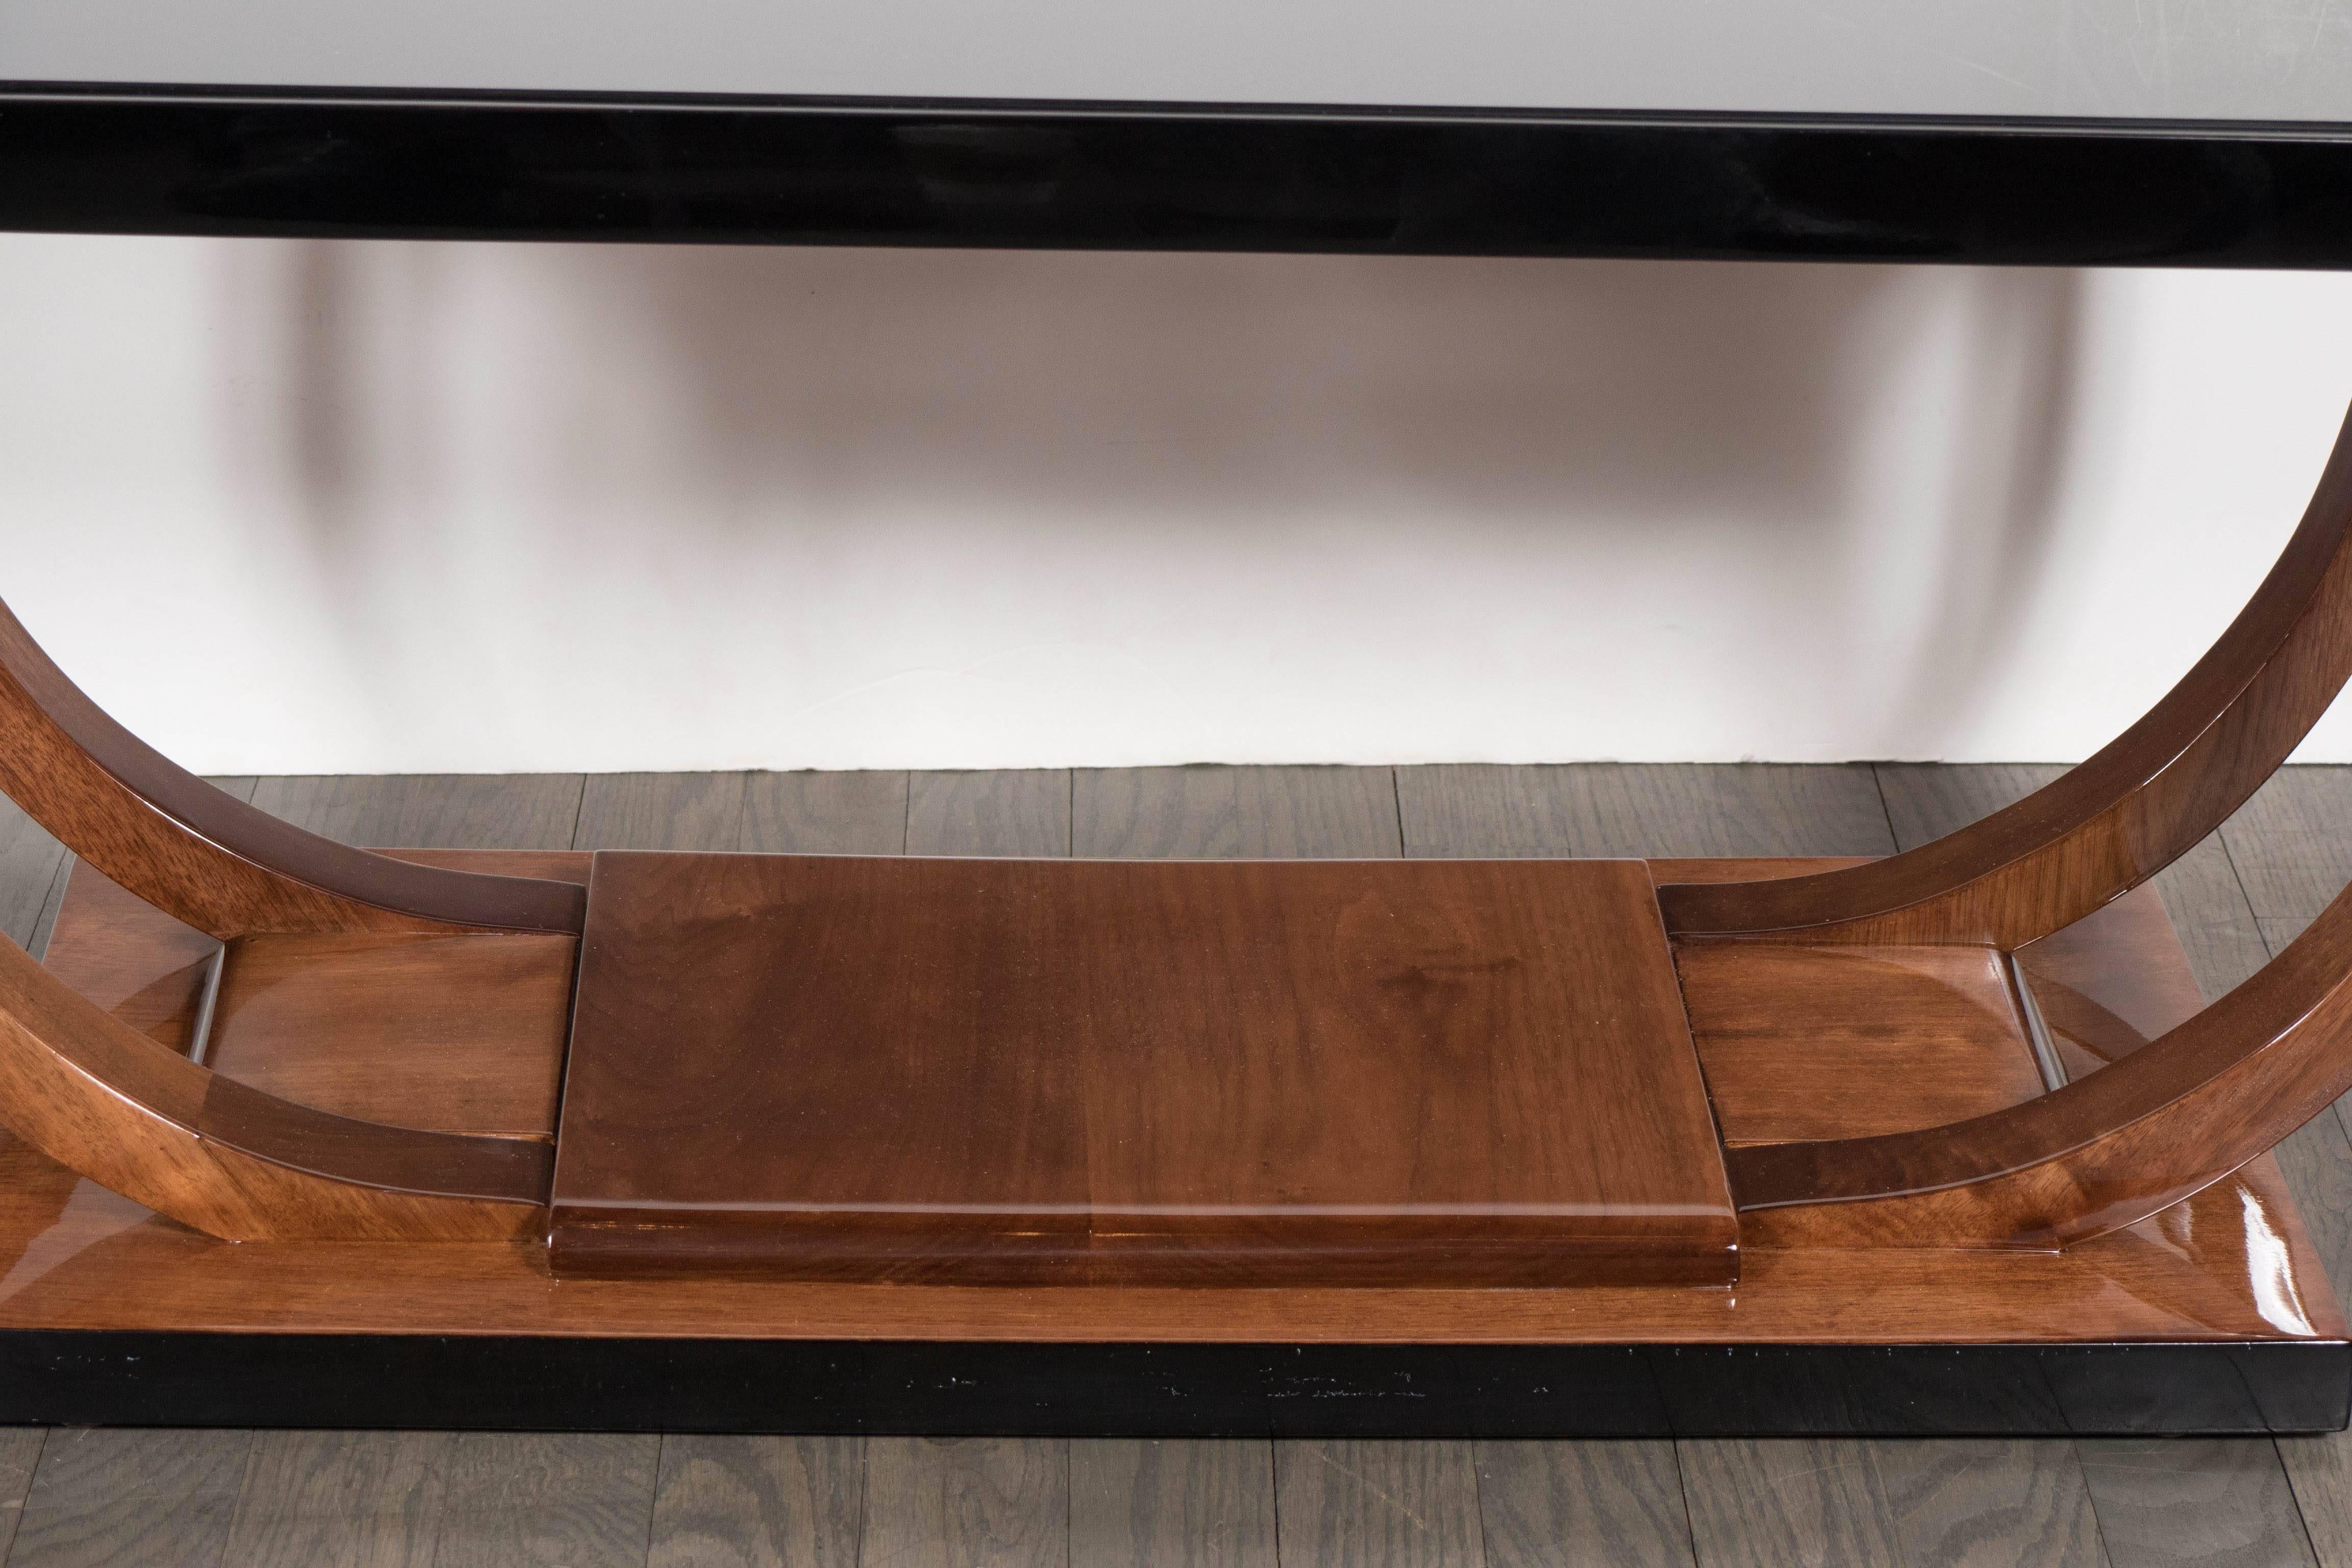 A Machine Age Art Deco cocktail table by Modernage Furniture Company featuring a banded U-form base in walnut stretching the full length of the table anchored by a rectangular base. The tabletop is trimmed in black lacquer with inset vitrolite. It